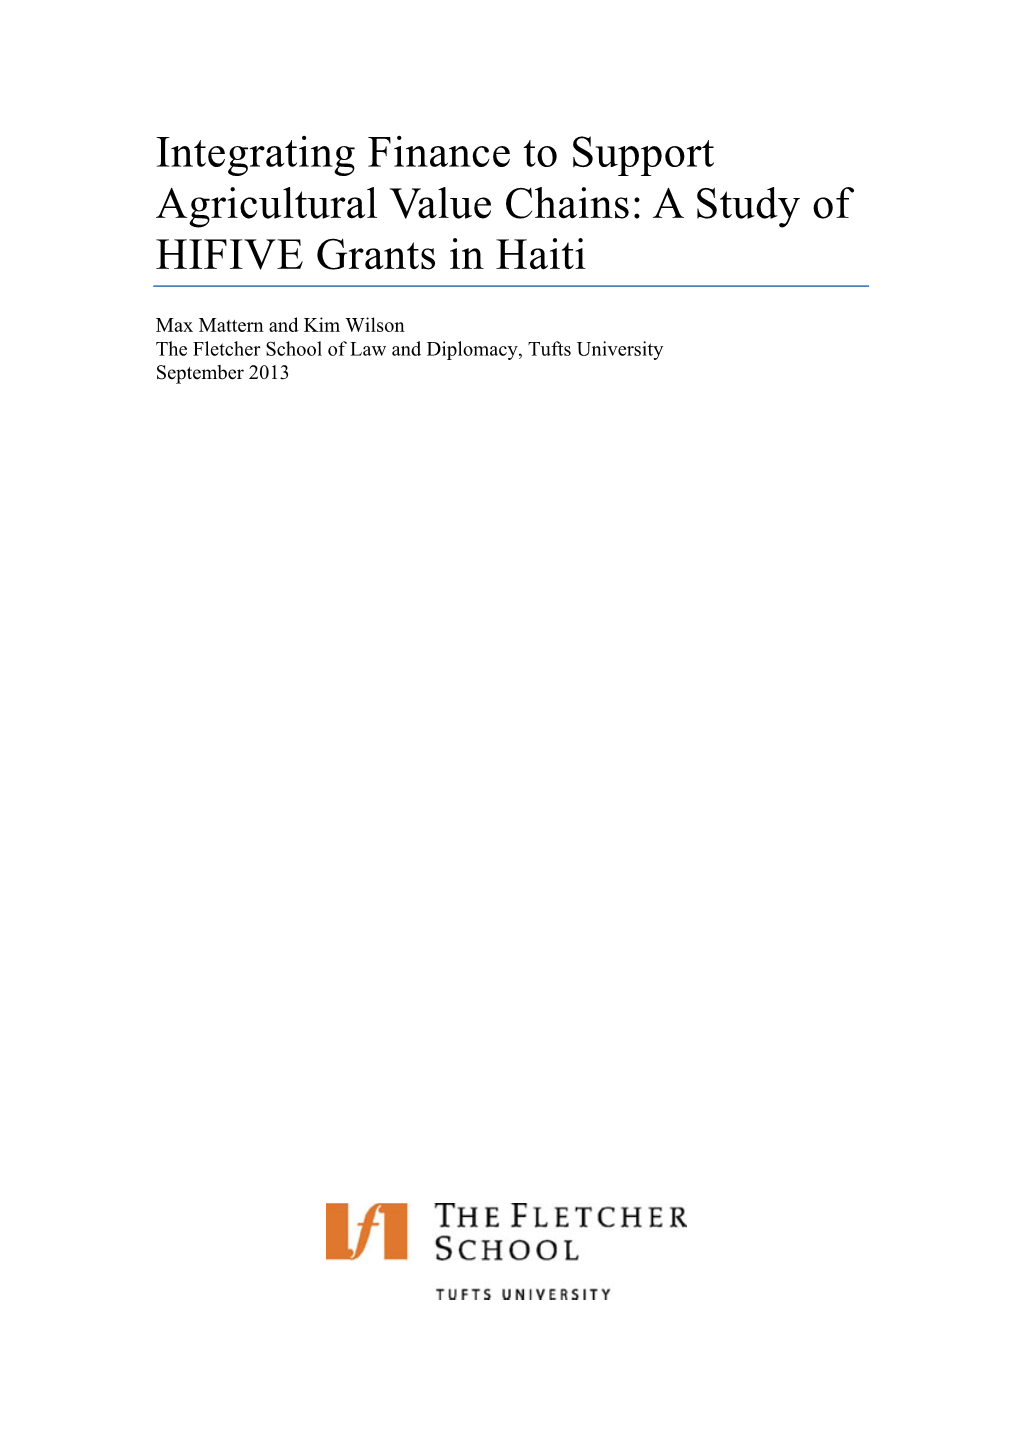 Integrating Finance to Support Agricultural Value Chains: a Study of HIFIVE Grants in Haiti